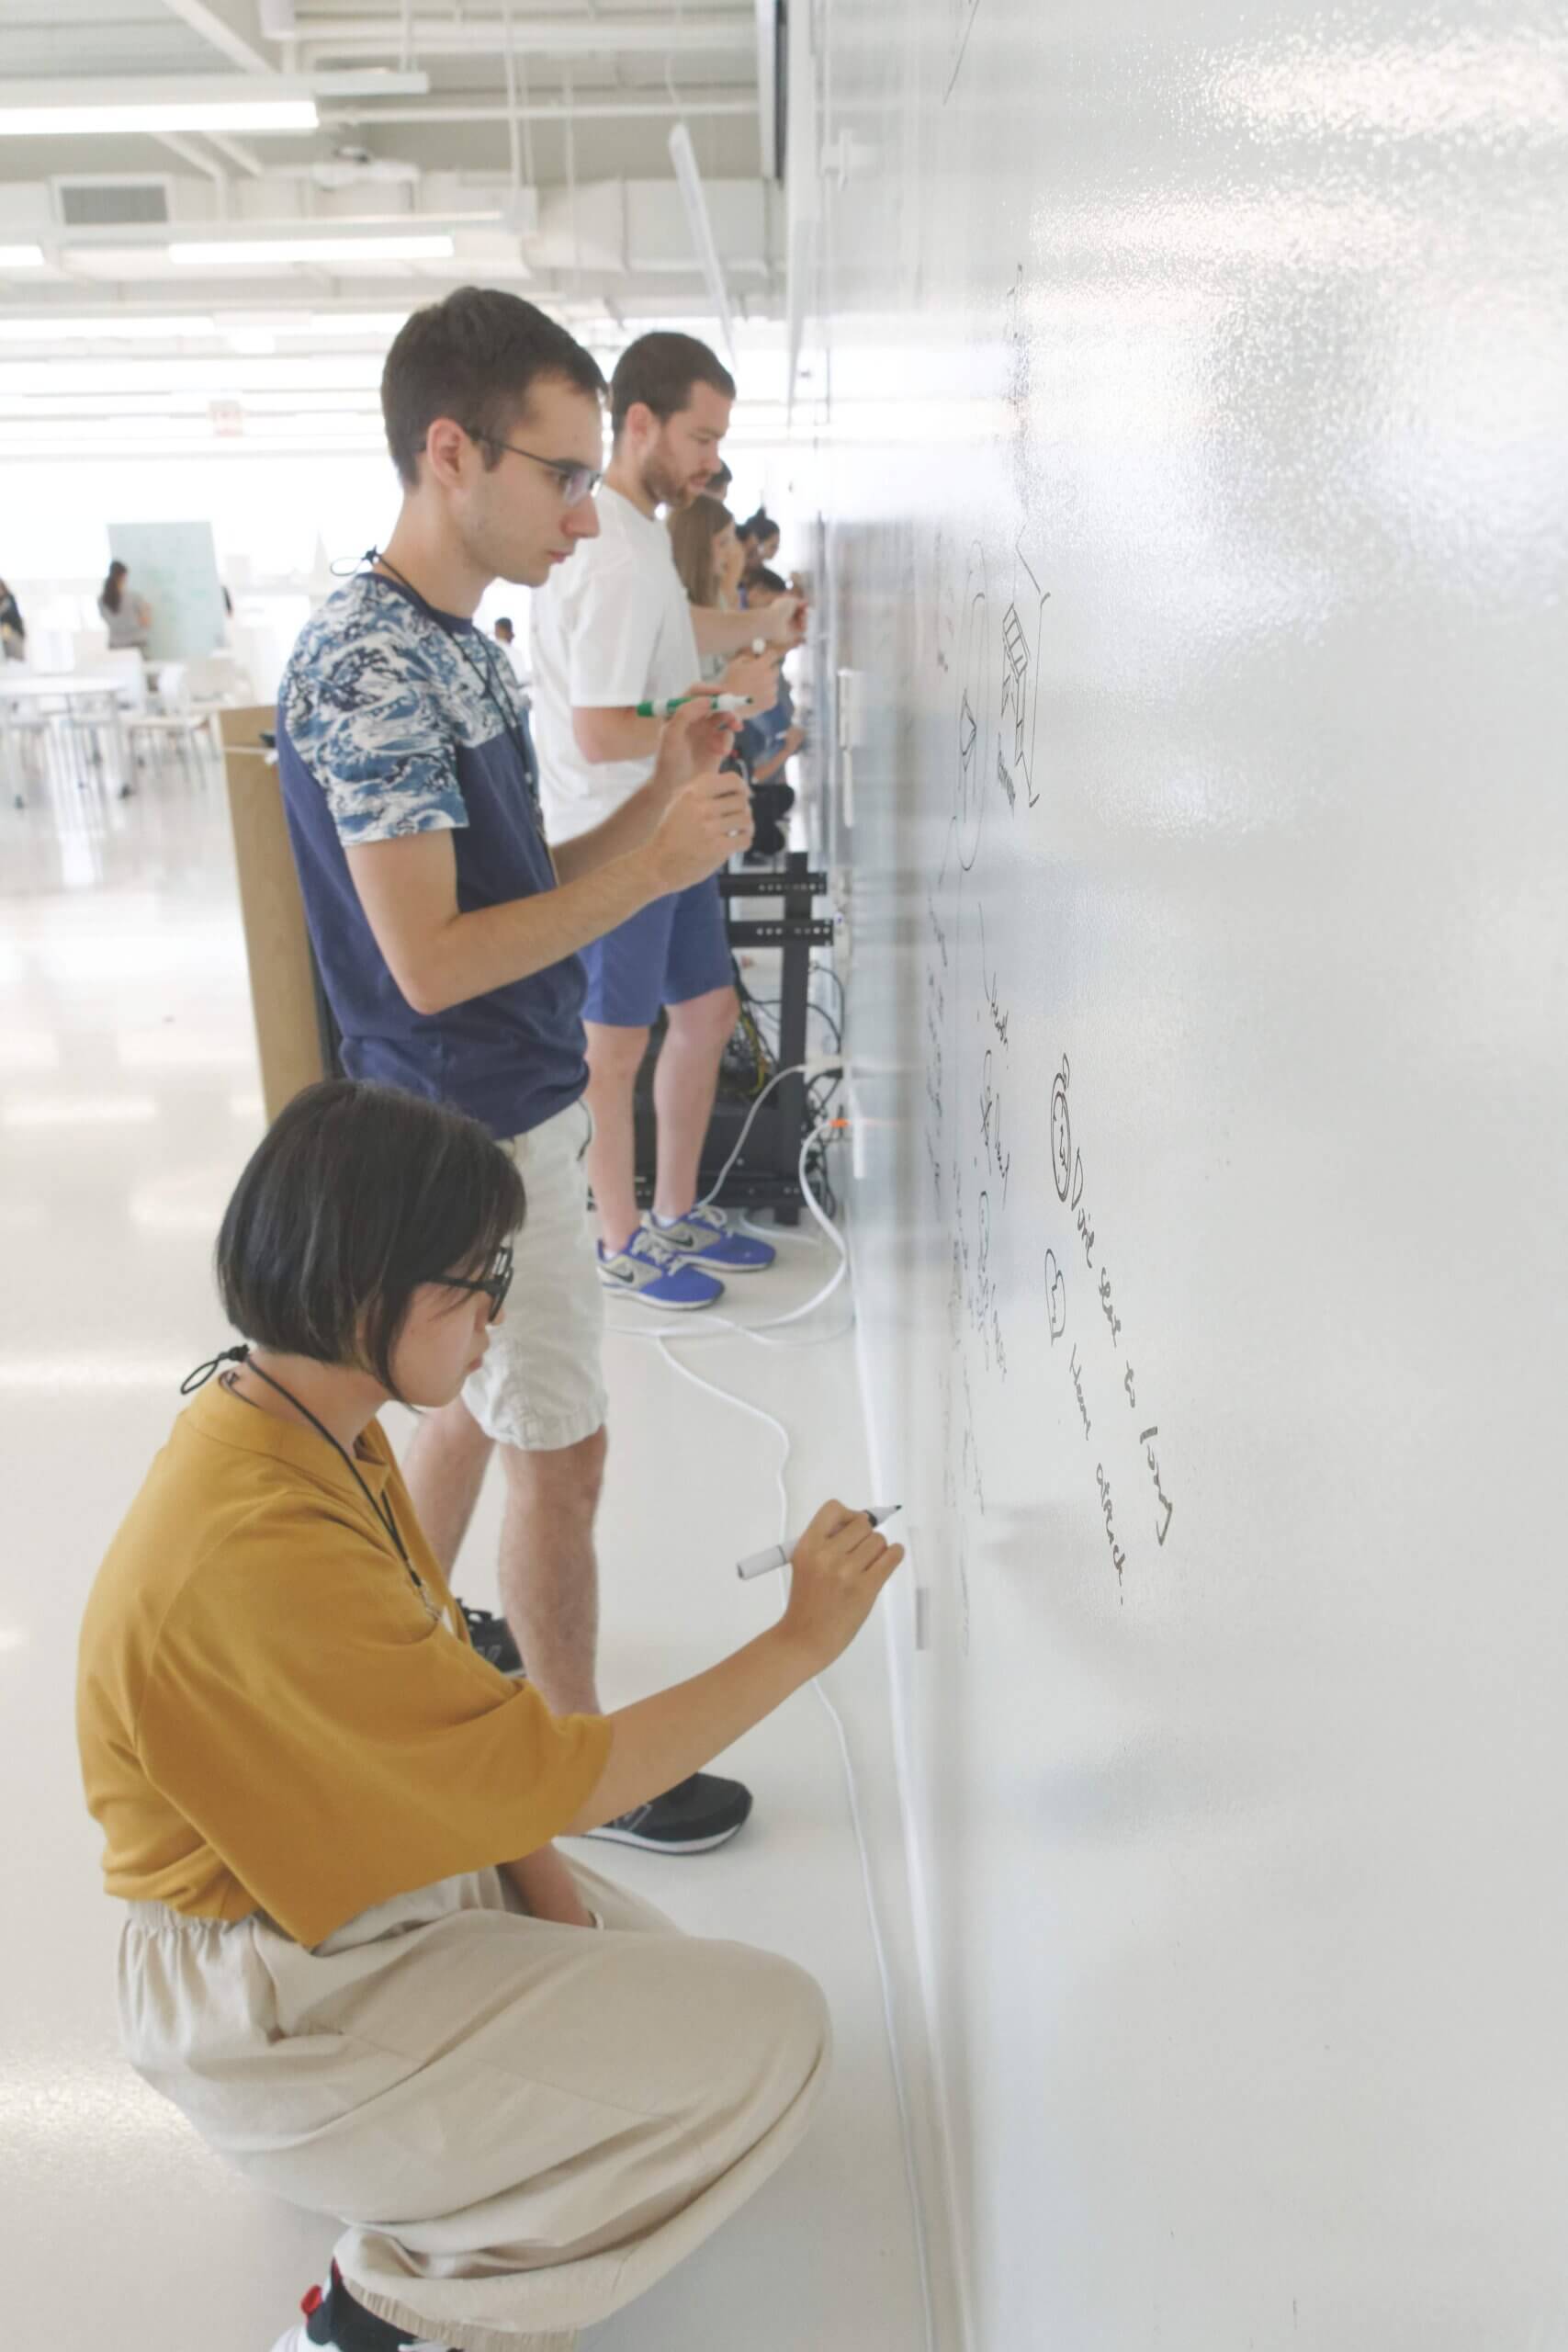 A photo of students at a whiteboard in college.